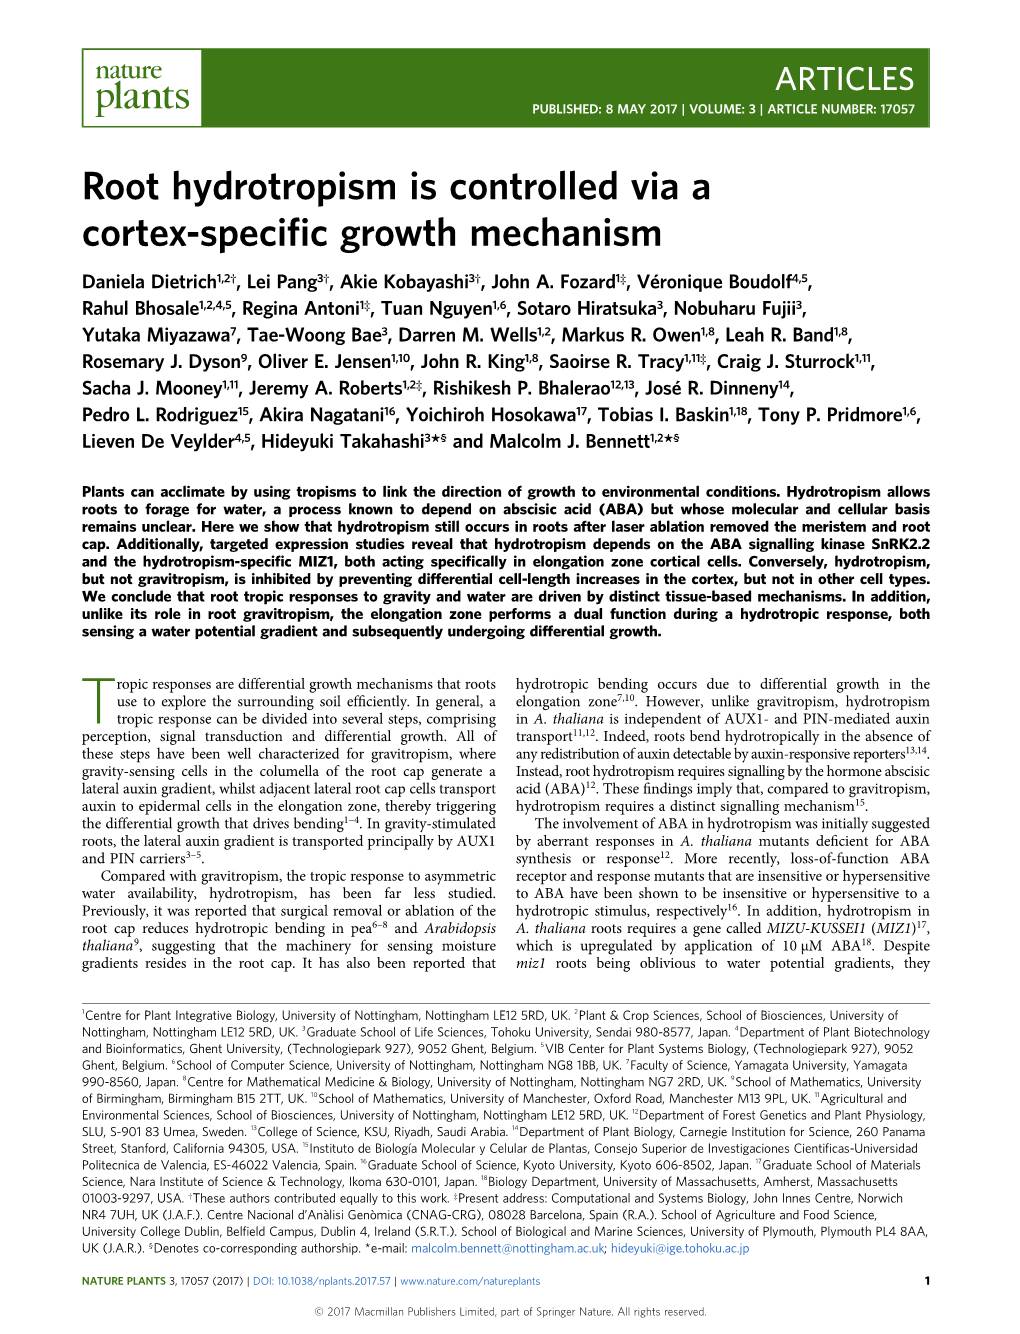 Root Hydrotropism Is Controlled Via a Cortex-Specific Growth Mechanism